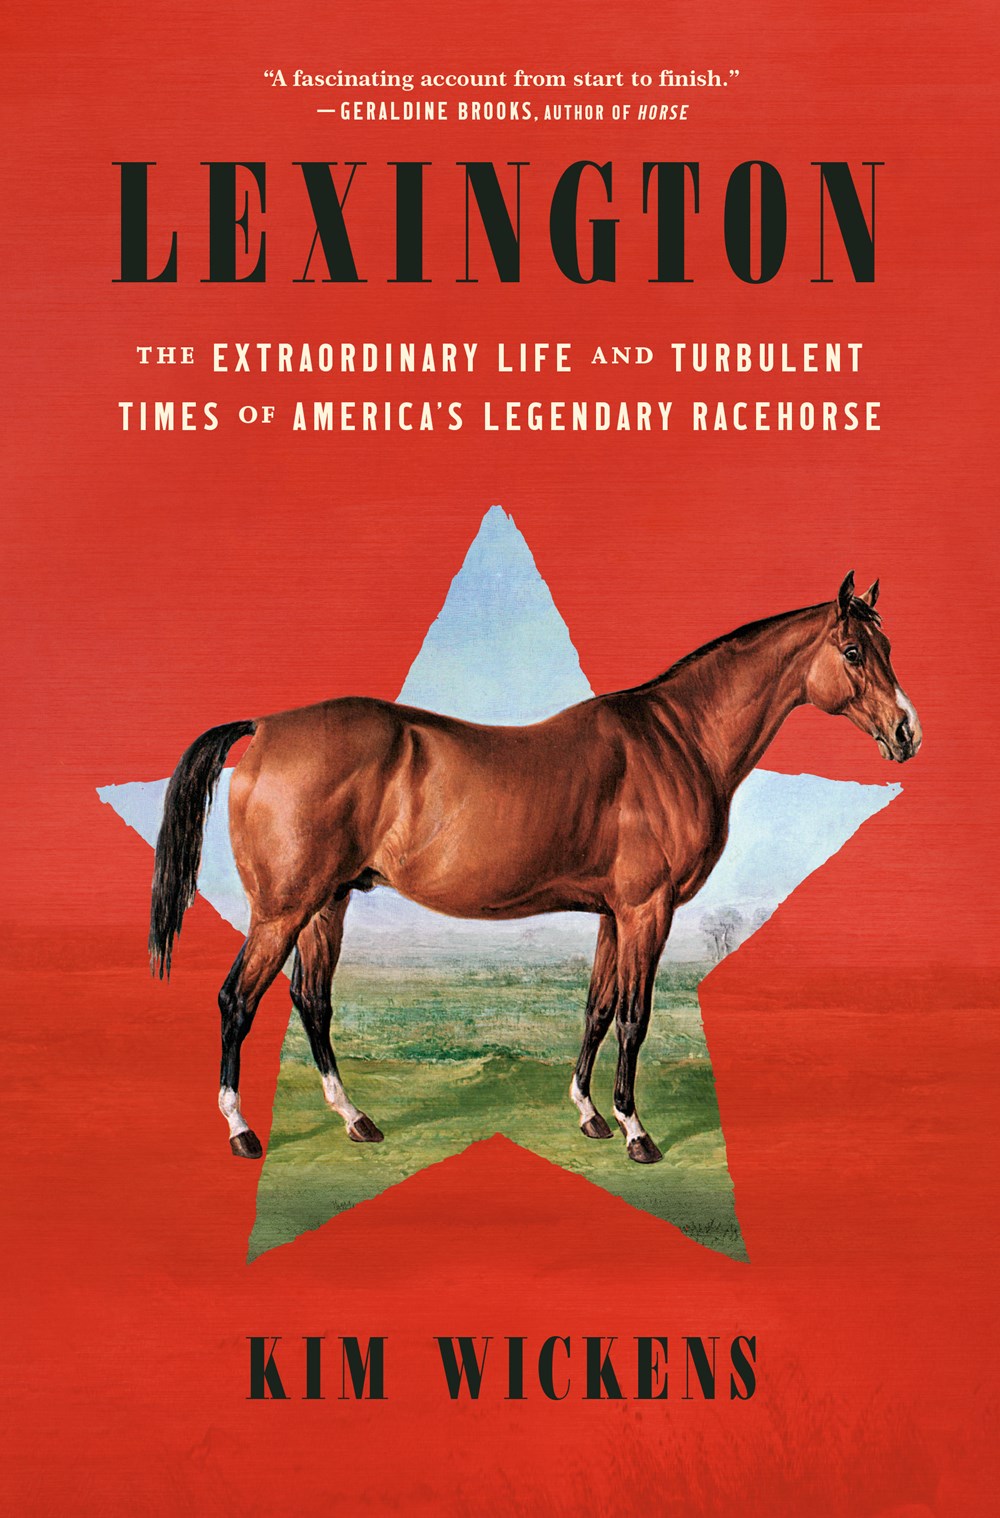 Lexington: The Extraordinary Life and Turbulent Times of America’s Legendary Racehorse